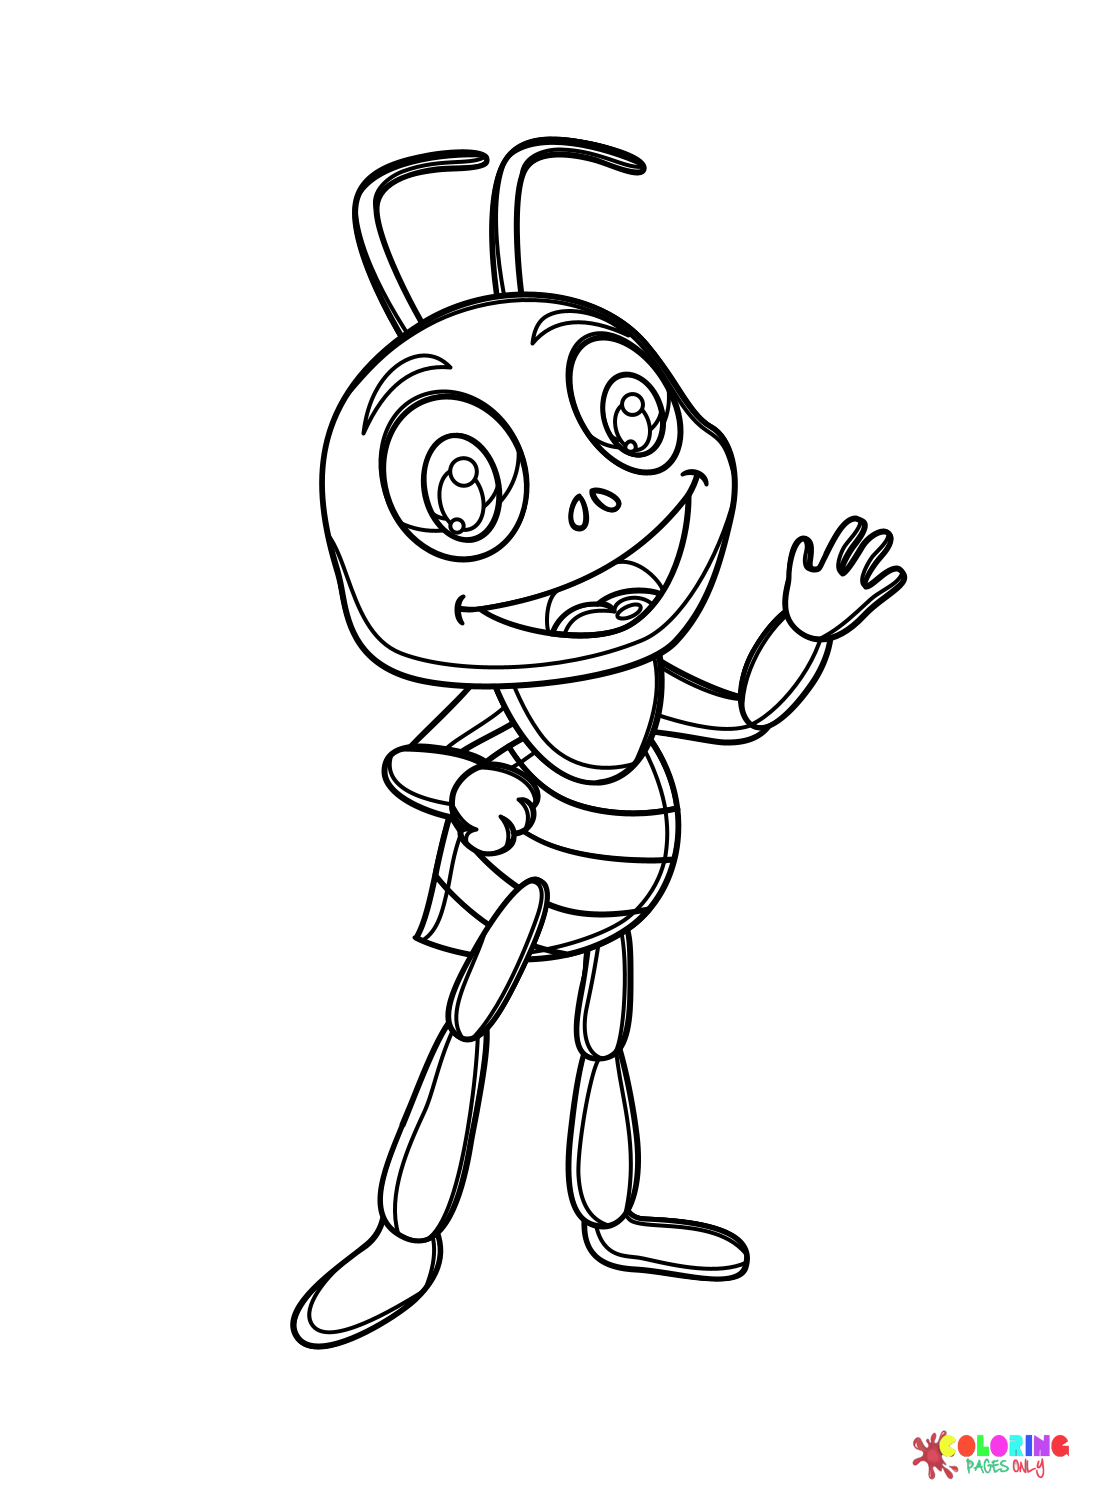 Ant to Print Coloring Pages